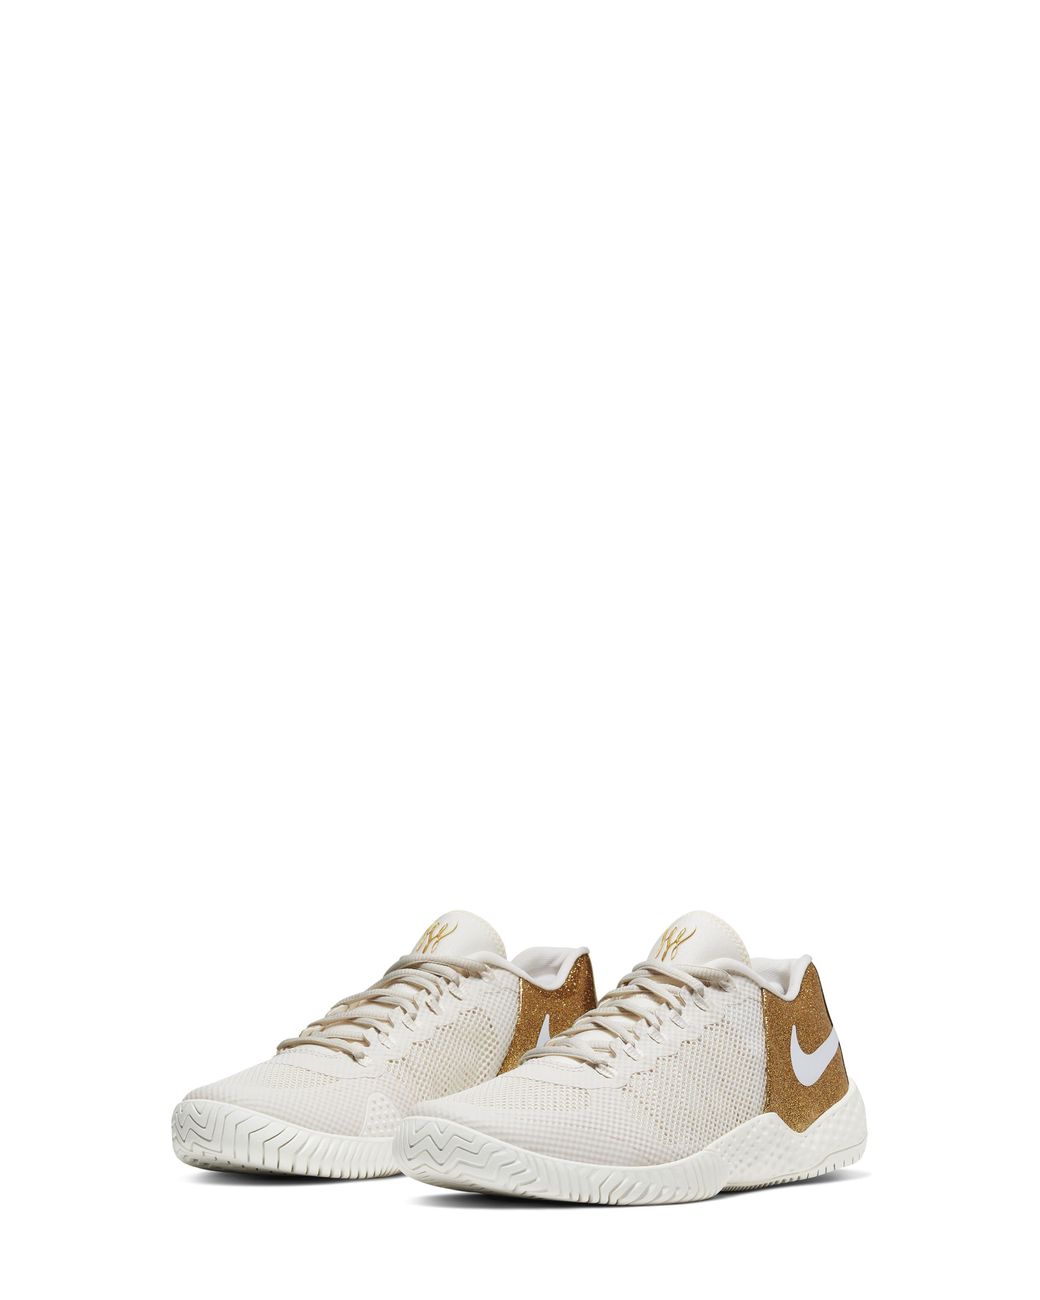 Nike Court Flare 2 Womens Hard Court Tennis Shoe in White | Lyst